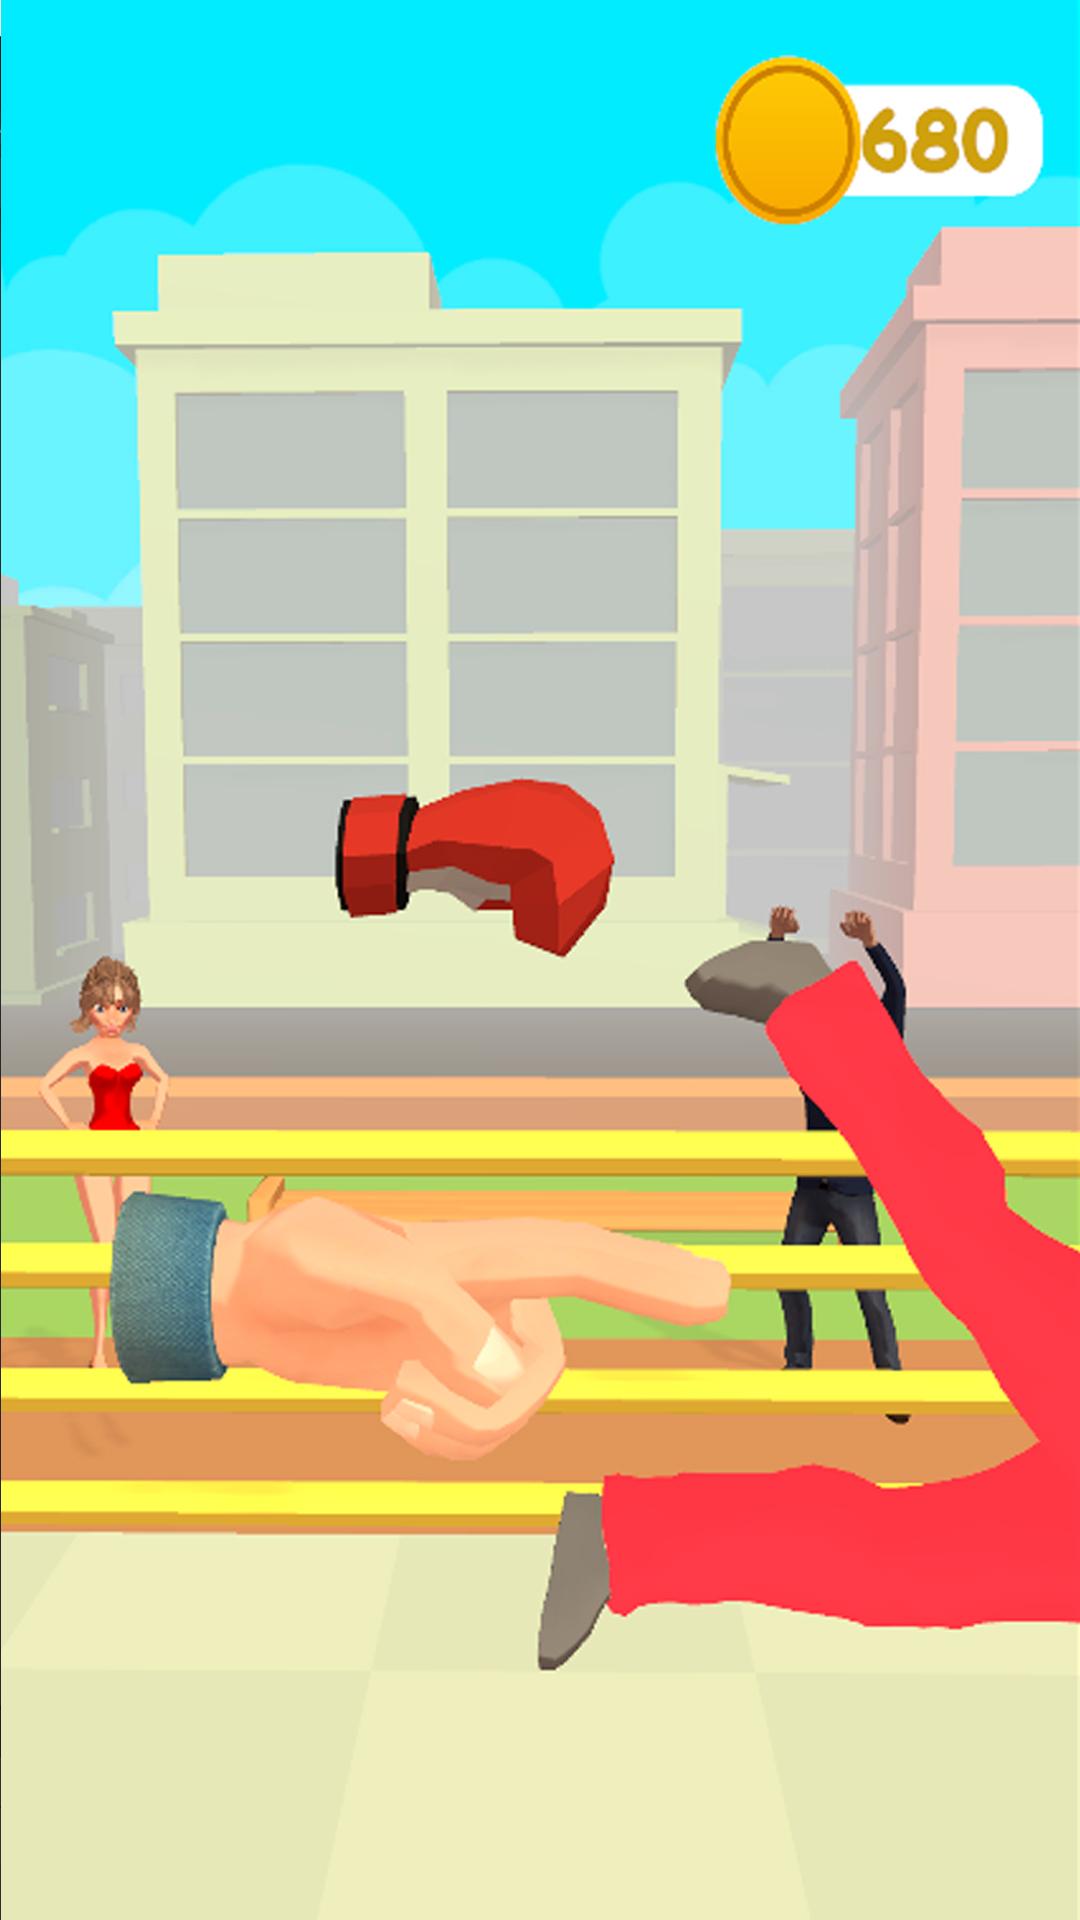 Shadow Boxing - Apps on Google Play